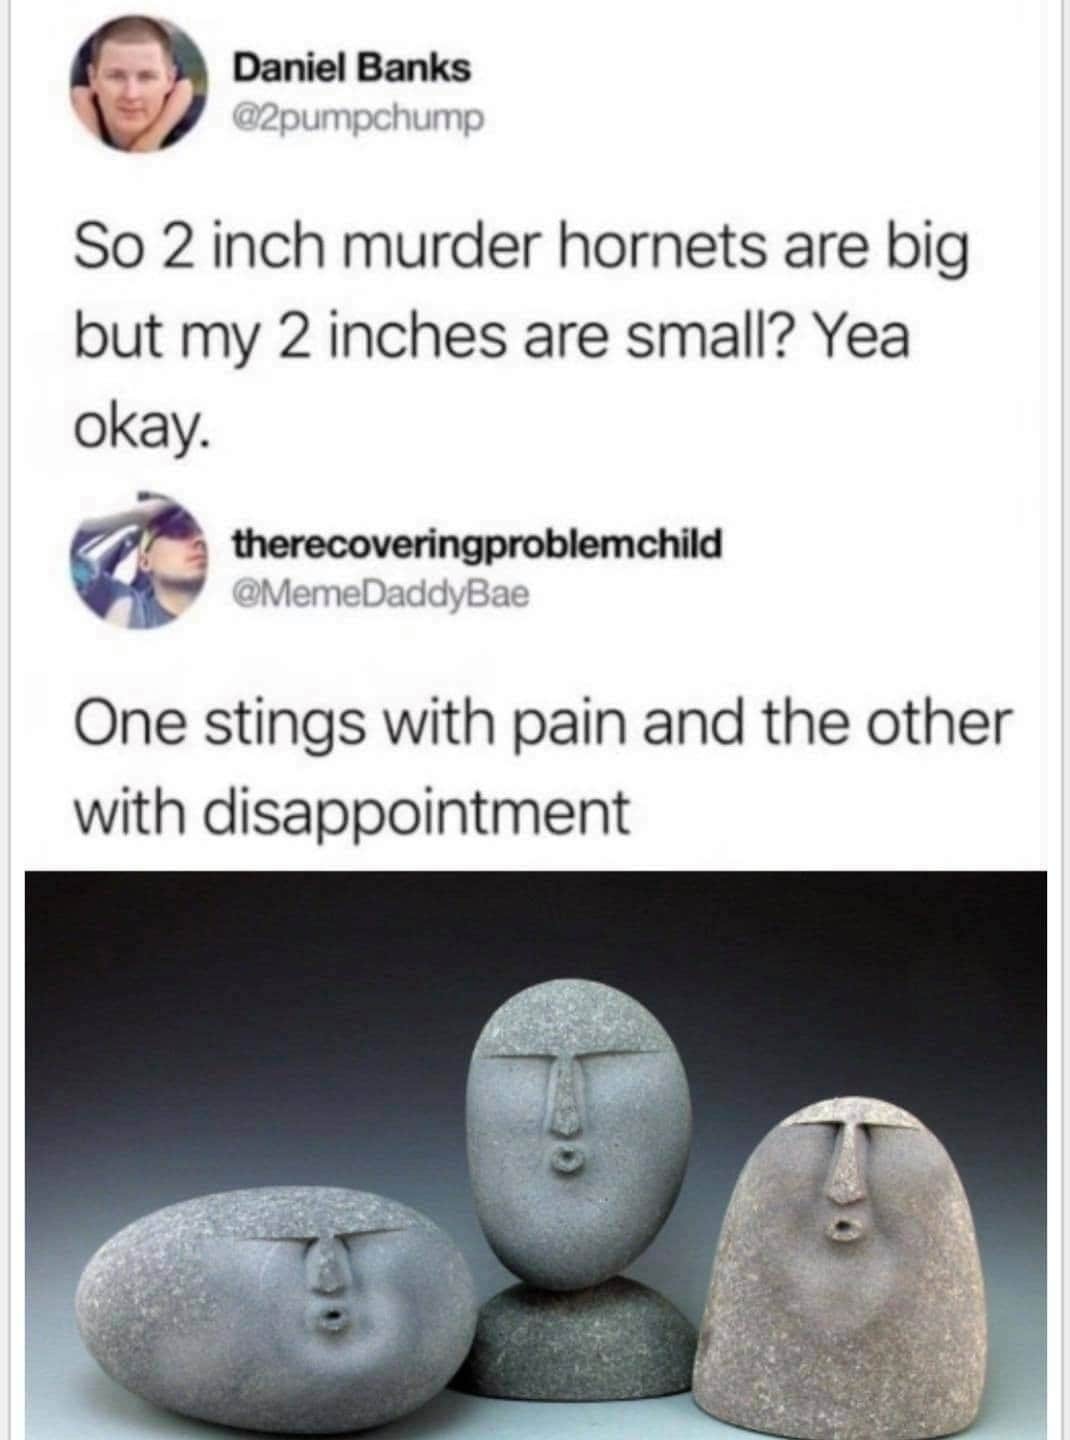 ooo rocks - Daniel Banks So 2 inch murder hornets are big but my 2 inches are small? Yea okay. therecoveringproblemchild One stings with pain and the other with disappointment